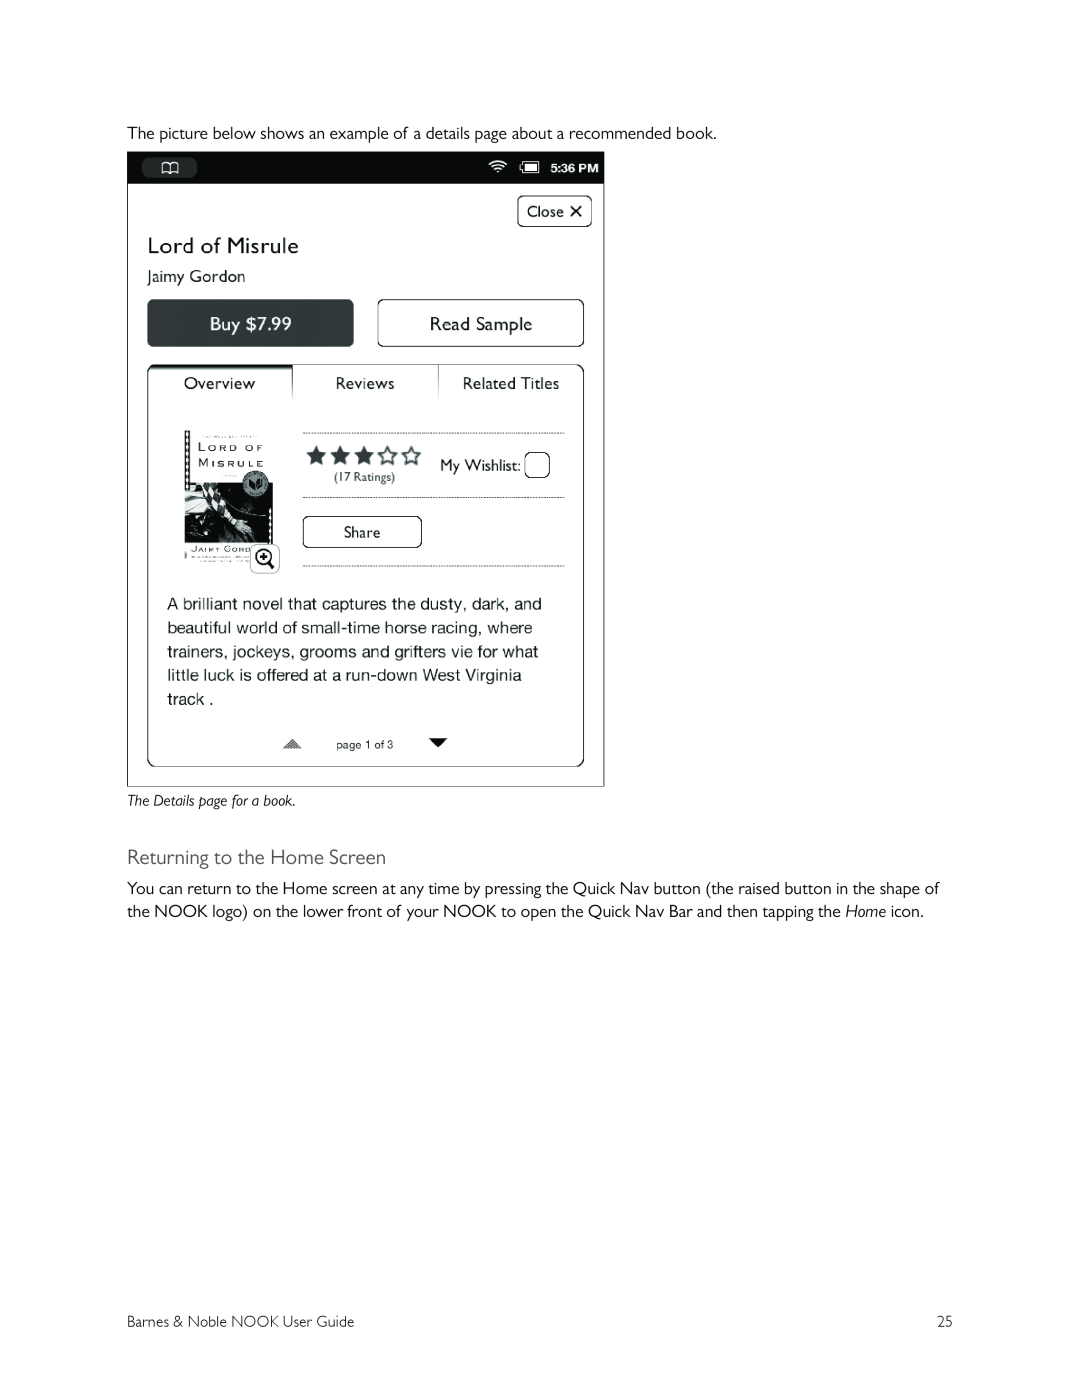 Barnes & Noble BNRV300 manual Returning to the Home Screen, The Details page for a book, Barnes & Noble NOOK User Guide 